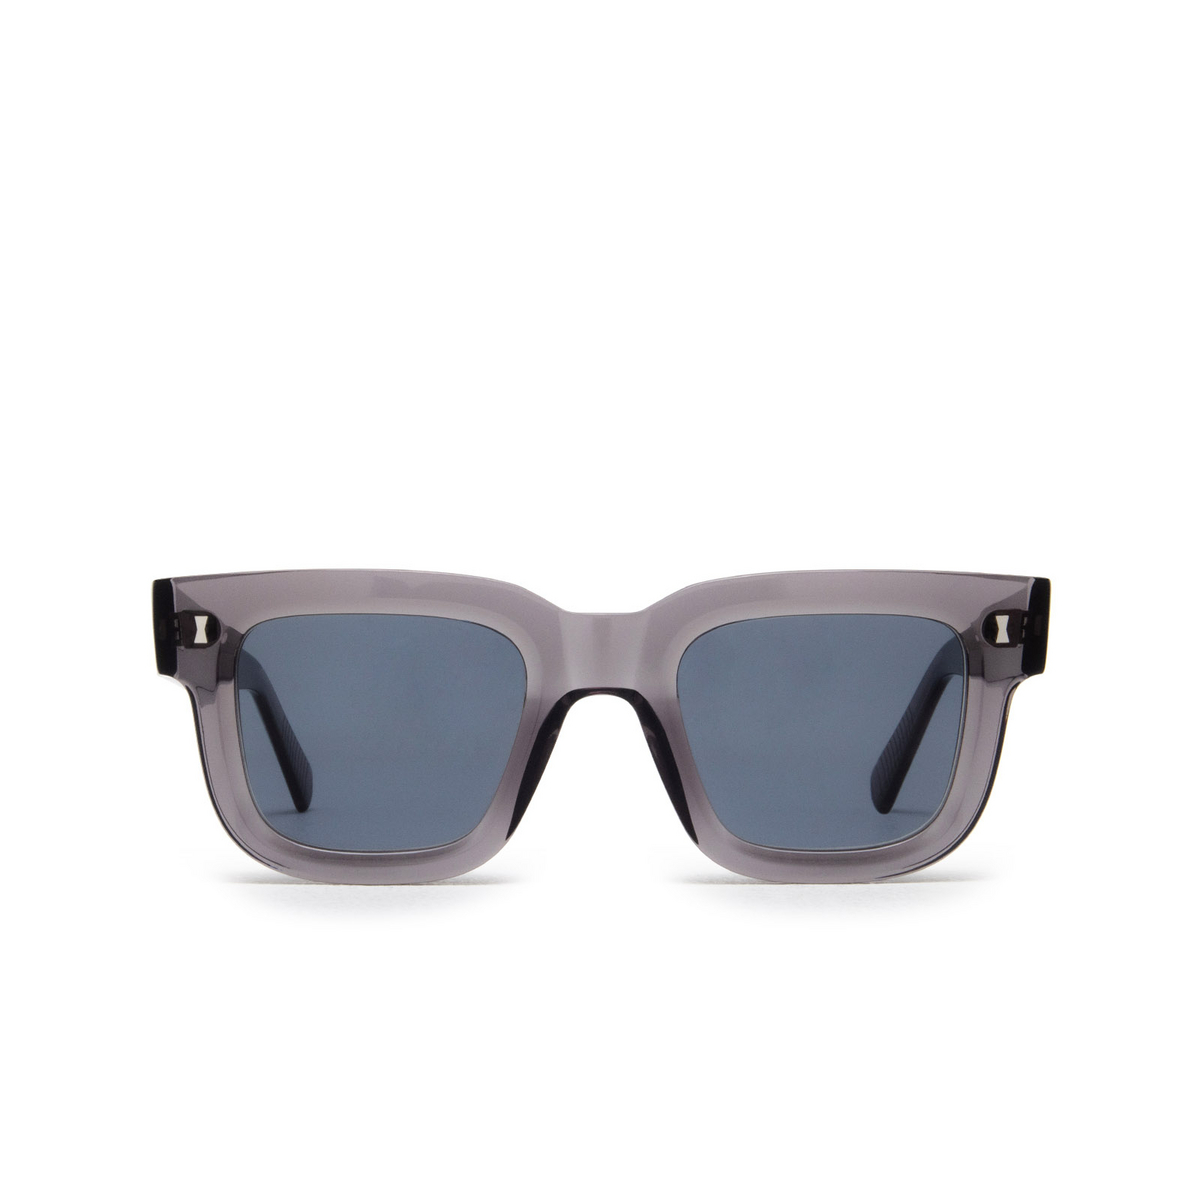 Cubitts PLENDER Sunglasses PLE-R-SMO Smoke Grey - front view